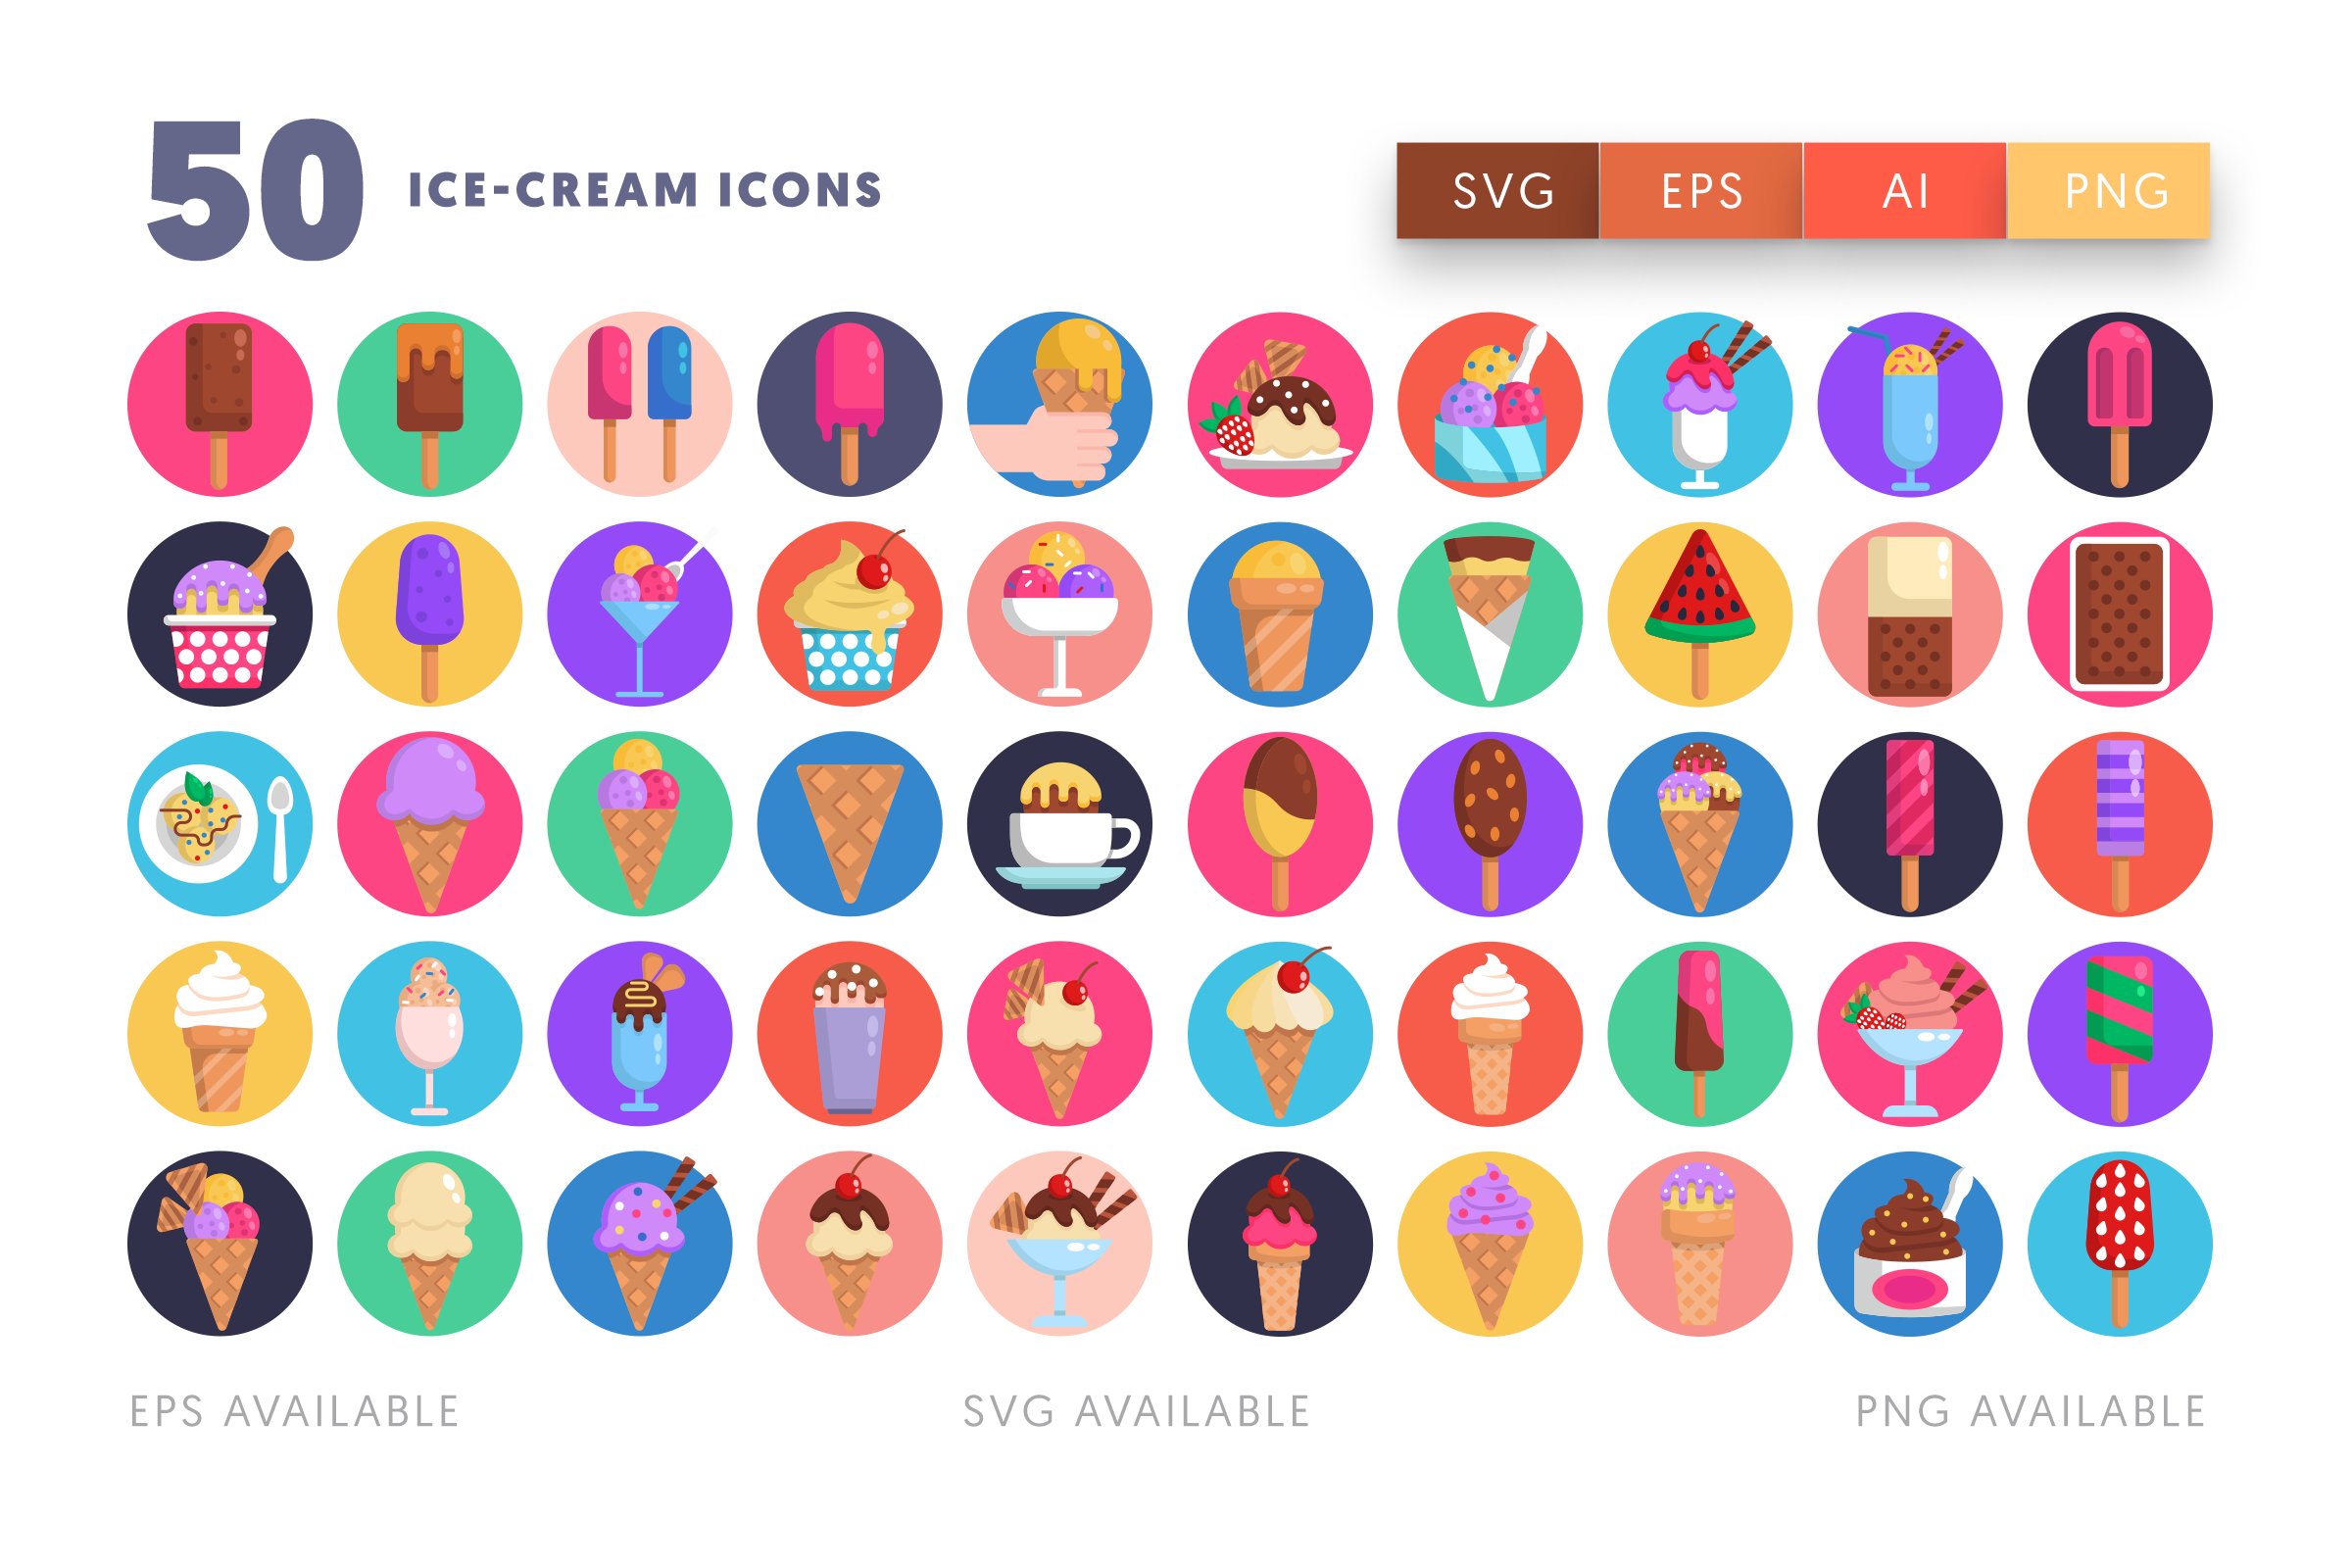 50 Ice-Cream Icons preview image.